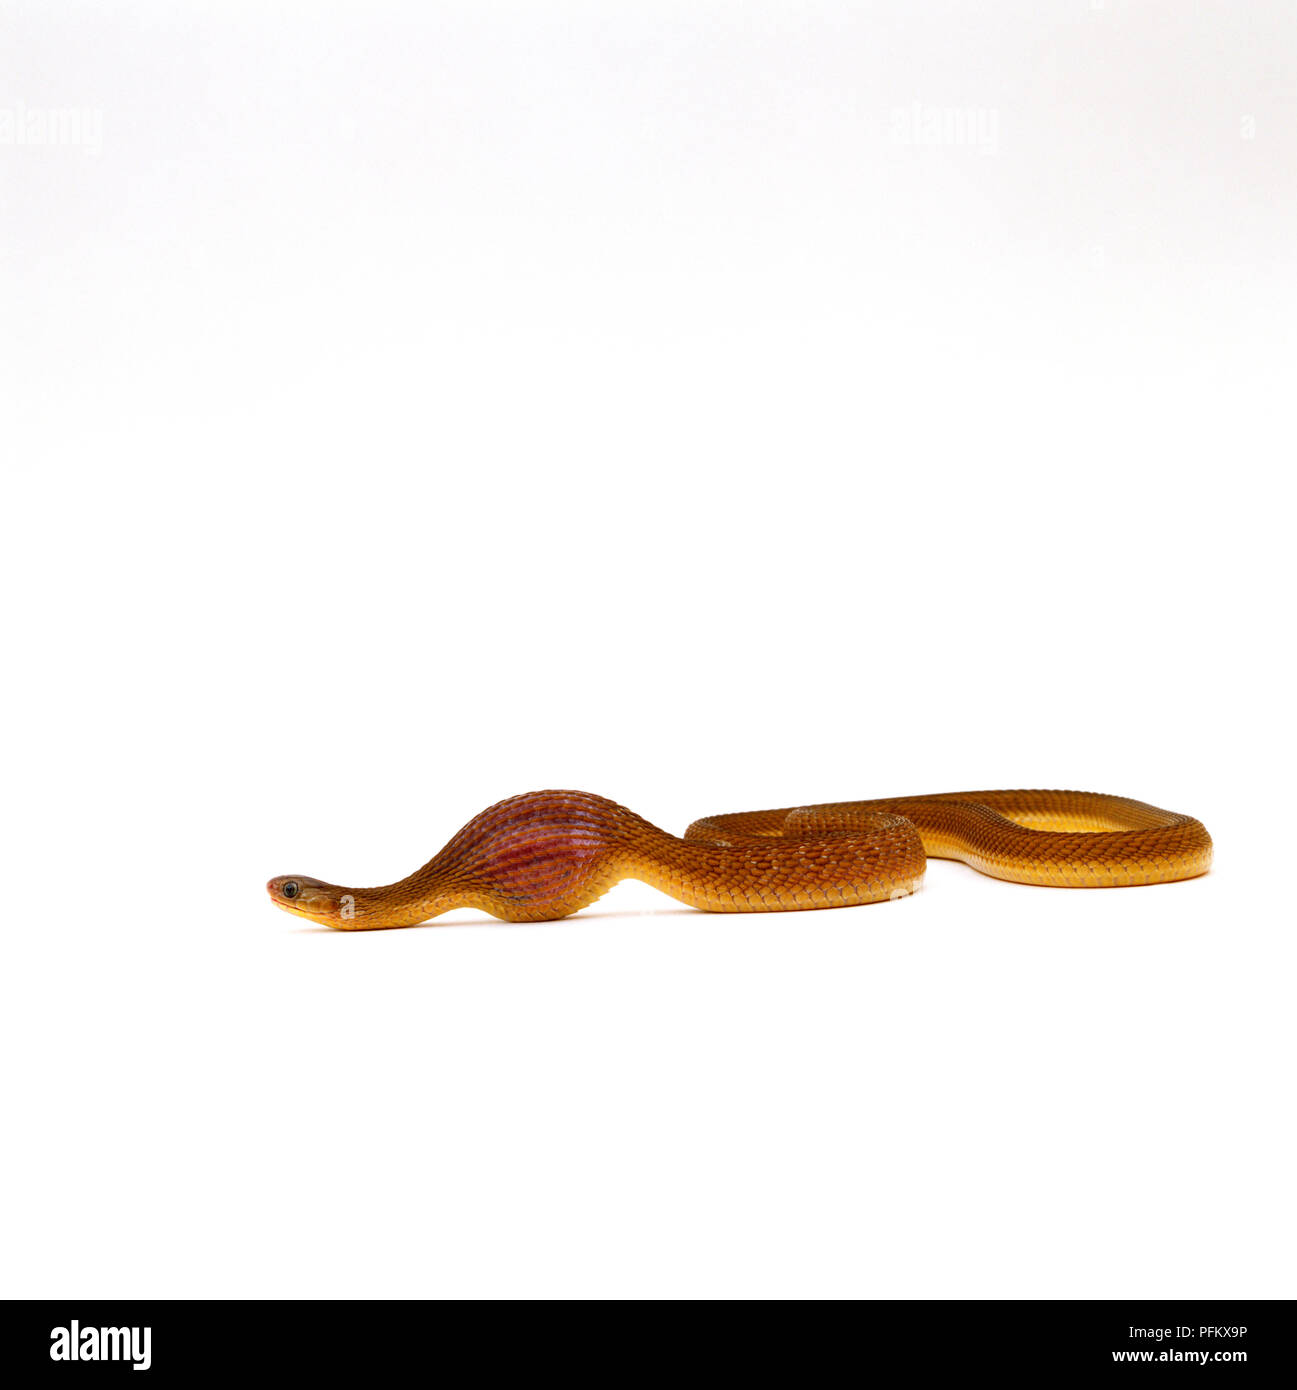 Common egg-eating snake (Dasypeltis scabra) swallowing an egg, side view Stock Photo